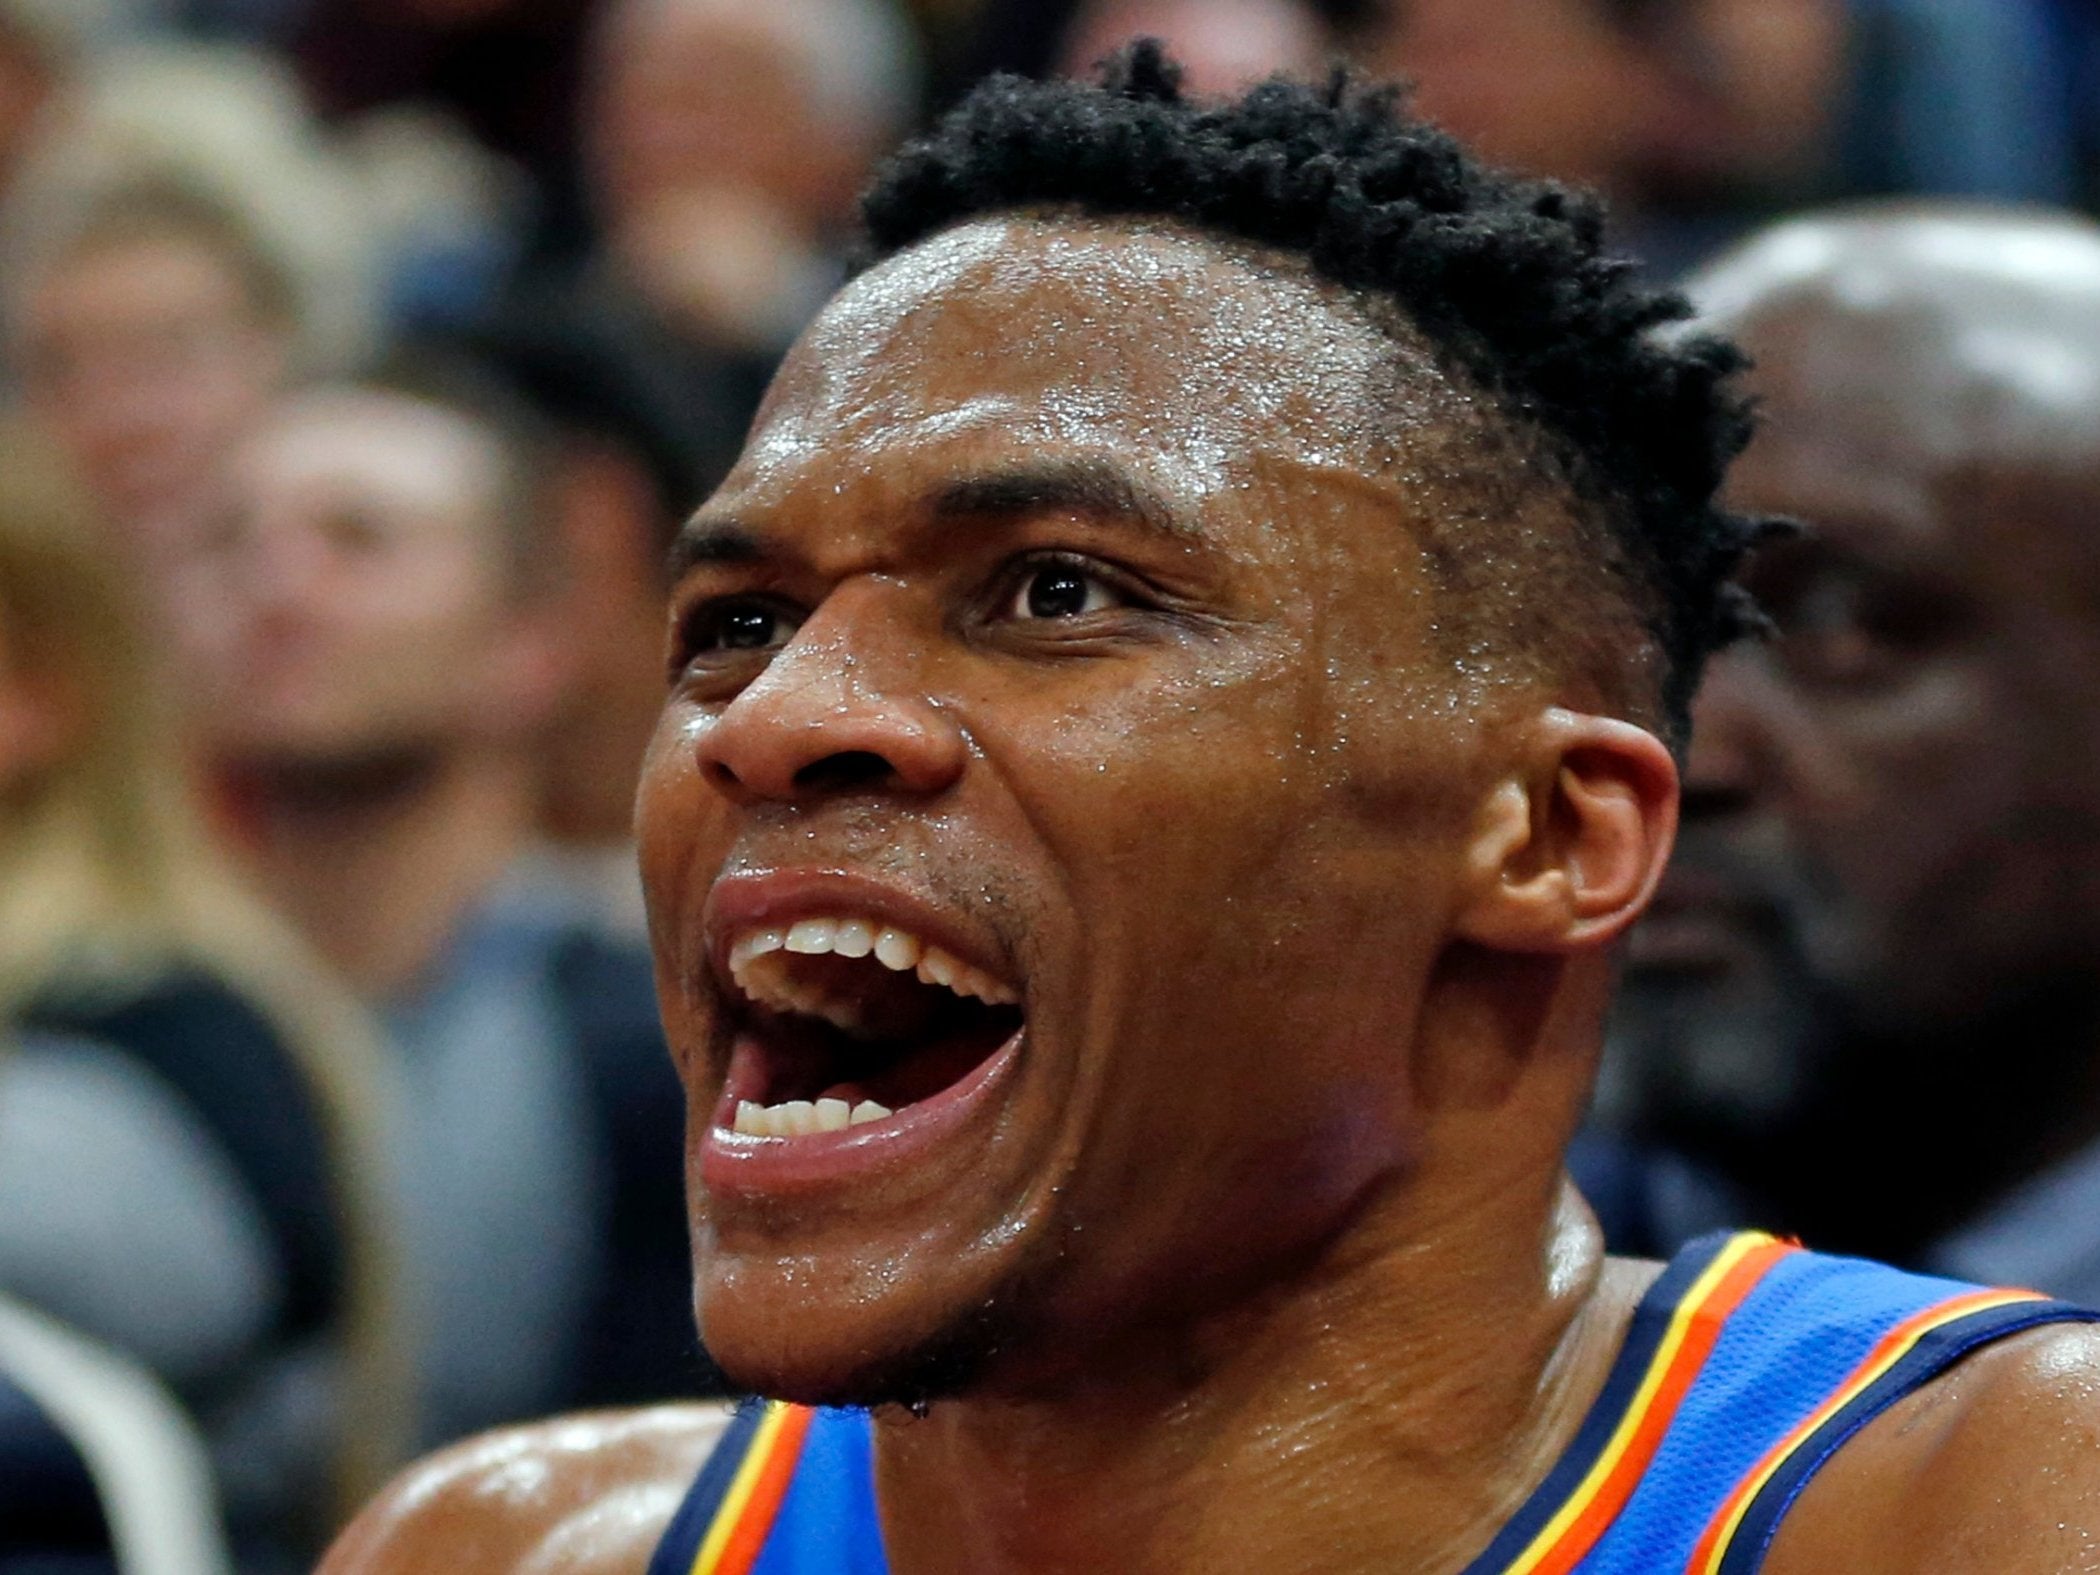 Russell Westbrook was angered by a fan comment in the Thunder's win over the Jazz